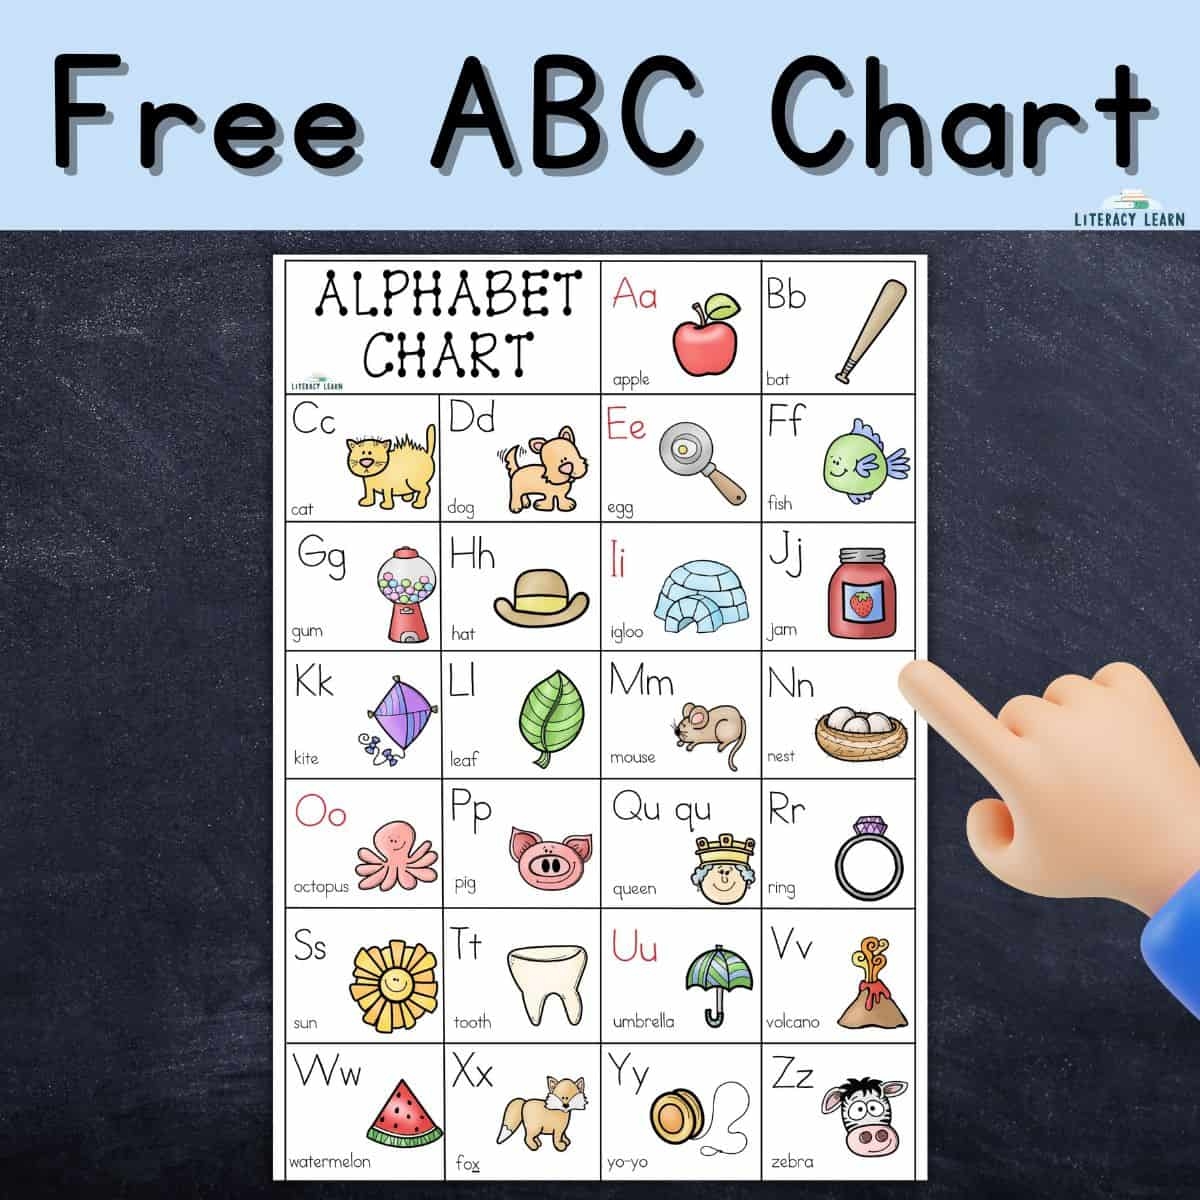 Free ABC Chart How To Use An Alphabet Poster Literacy Learn